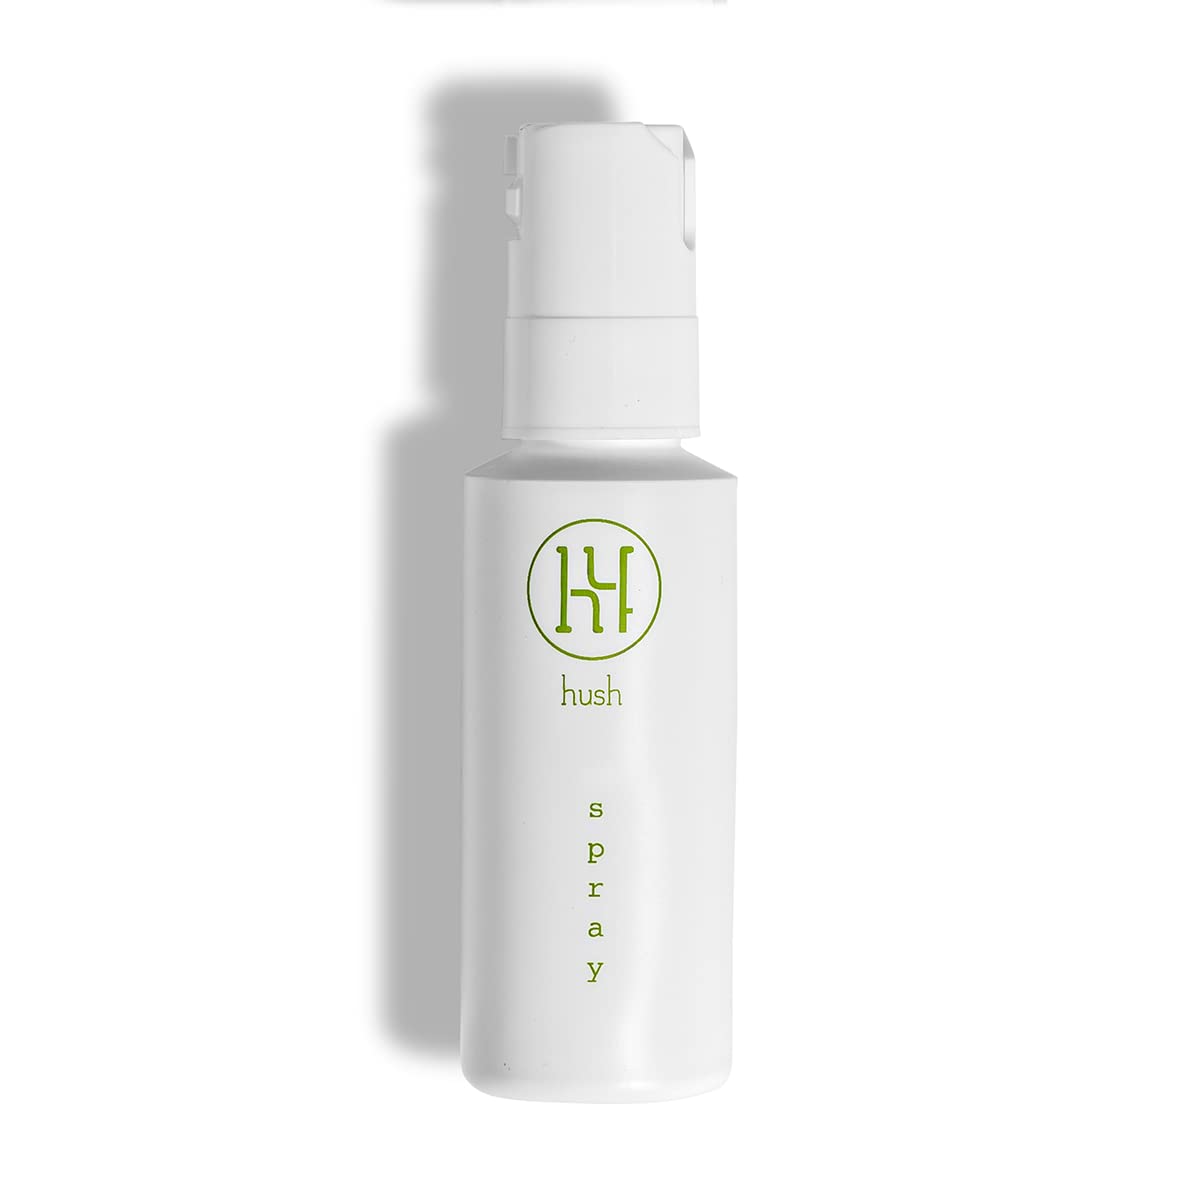 Hush Anesthetic Tattoo Numbing Spray Tattoo Aftercare [...]